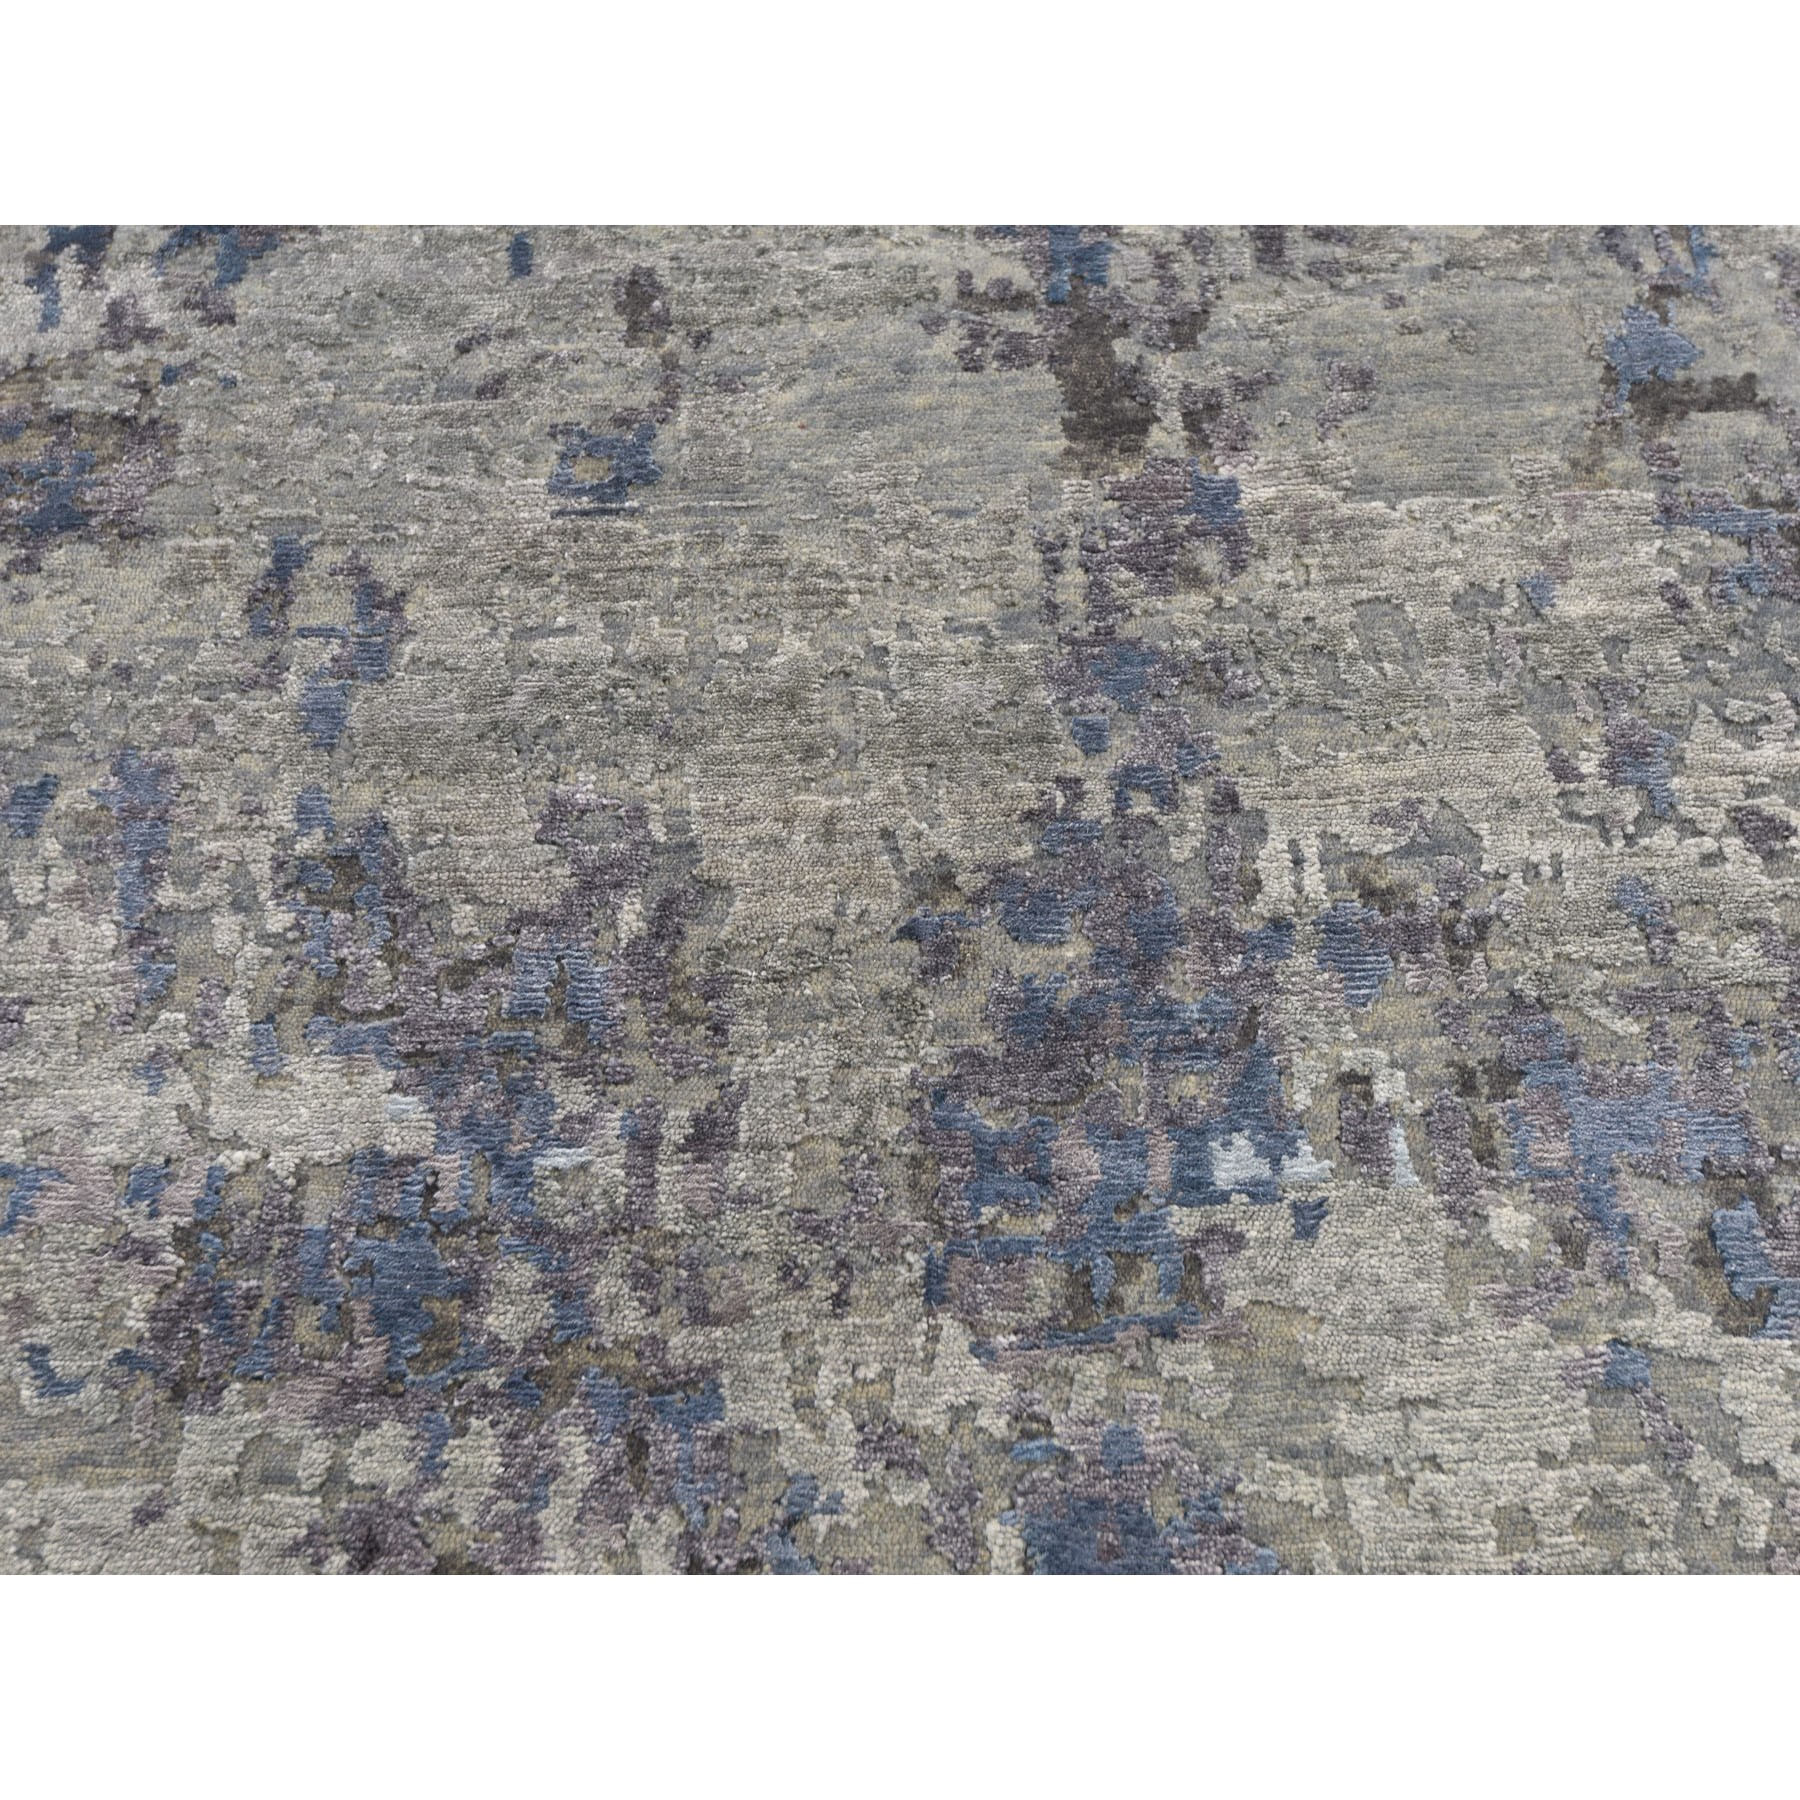 6-x8-10  Hi-Low Pile Abstract Design Wool And Silk Hand Knotted Oriental Rug 